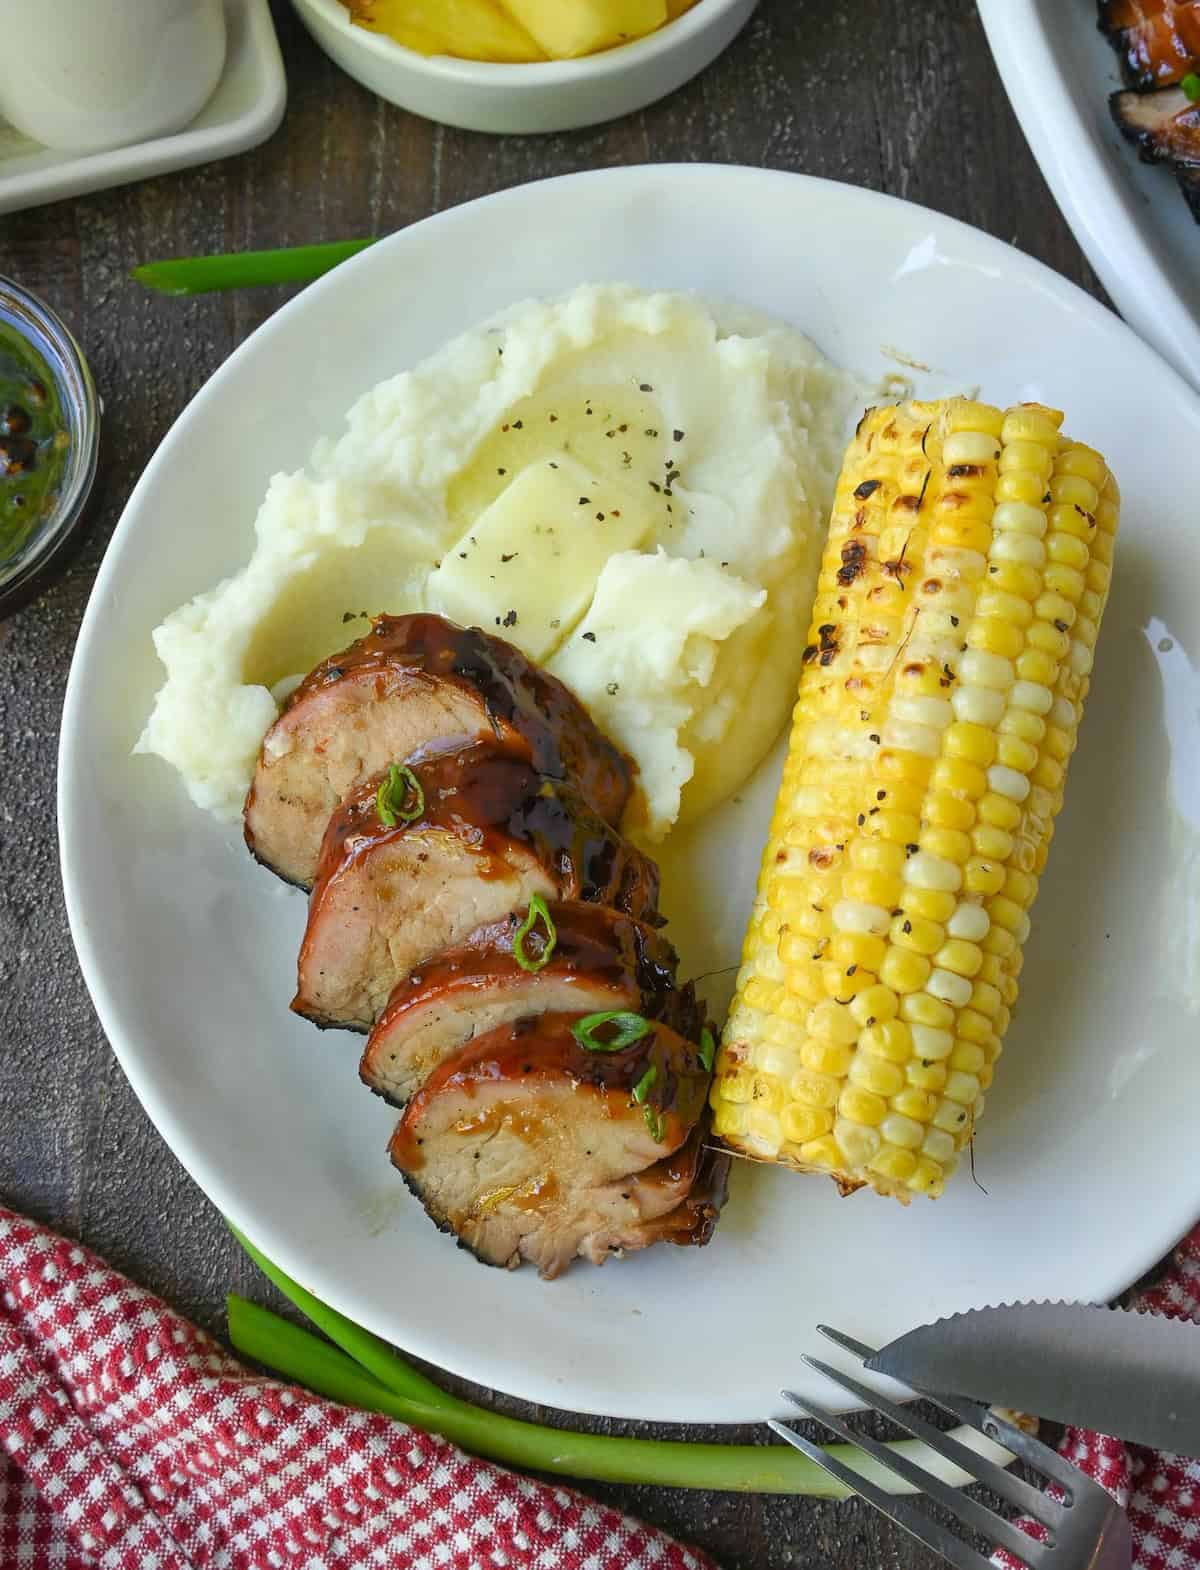 Pork tenderloin, mashed potatoes and corn on the cob on a plate.